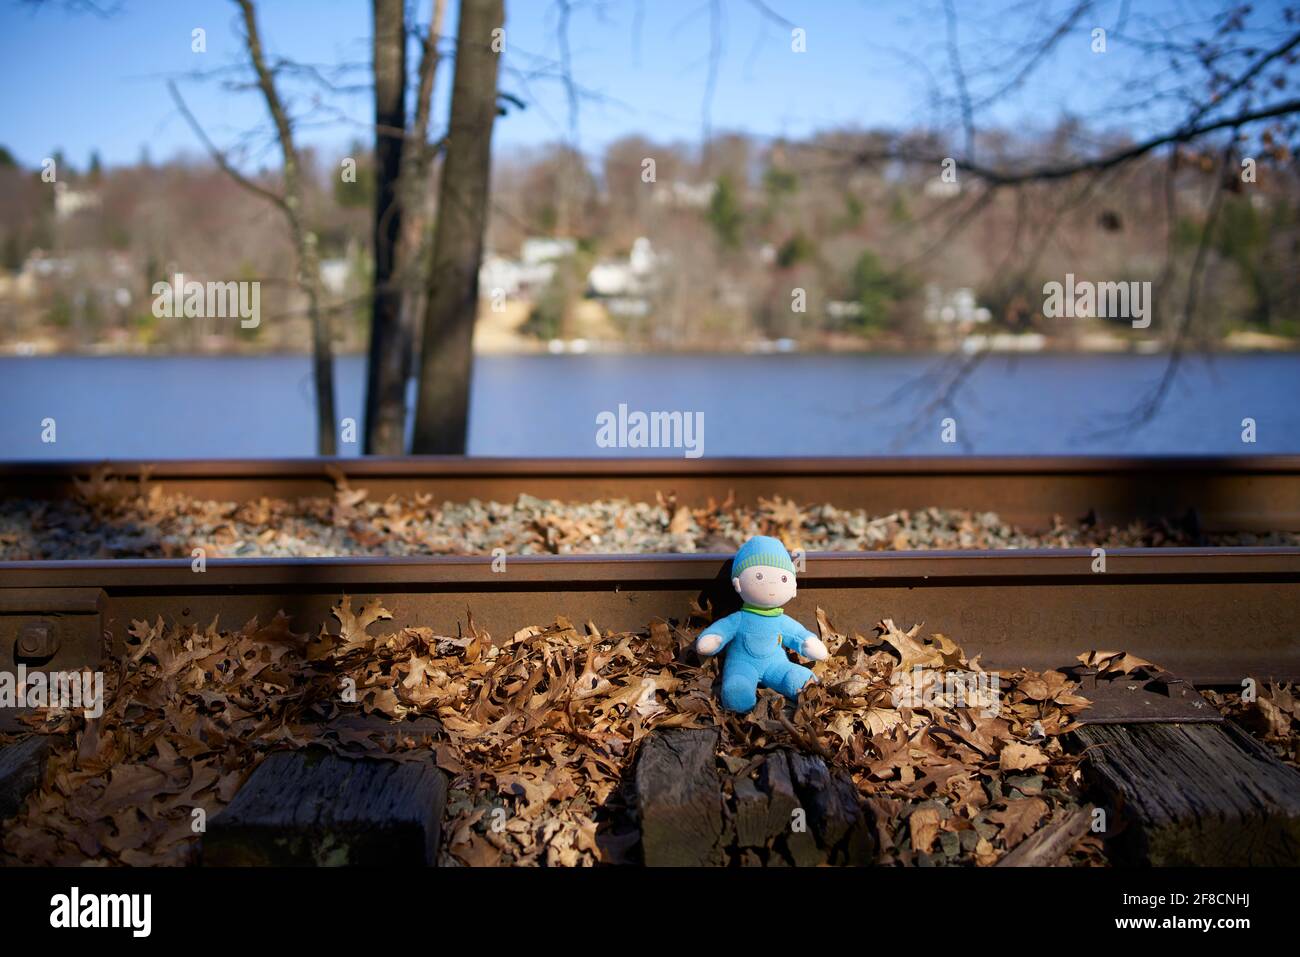 Lost toy doll next to train tracks. Stock Photo